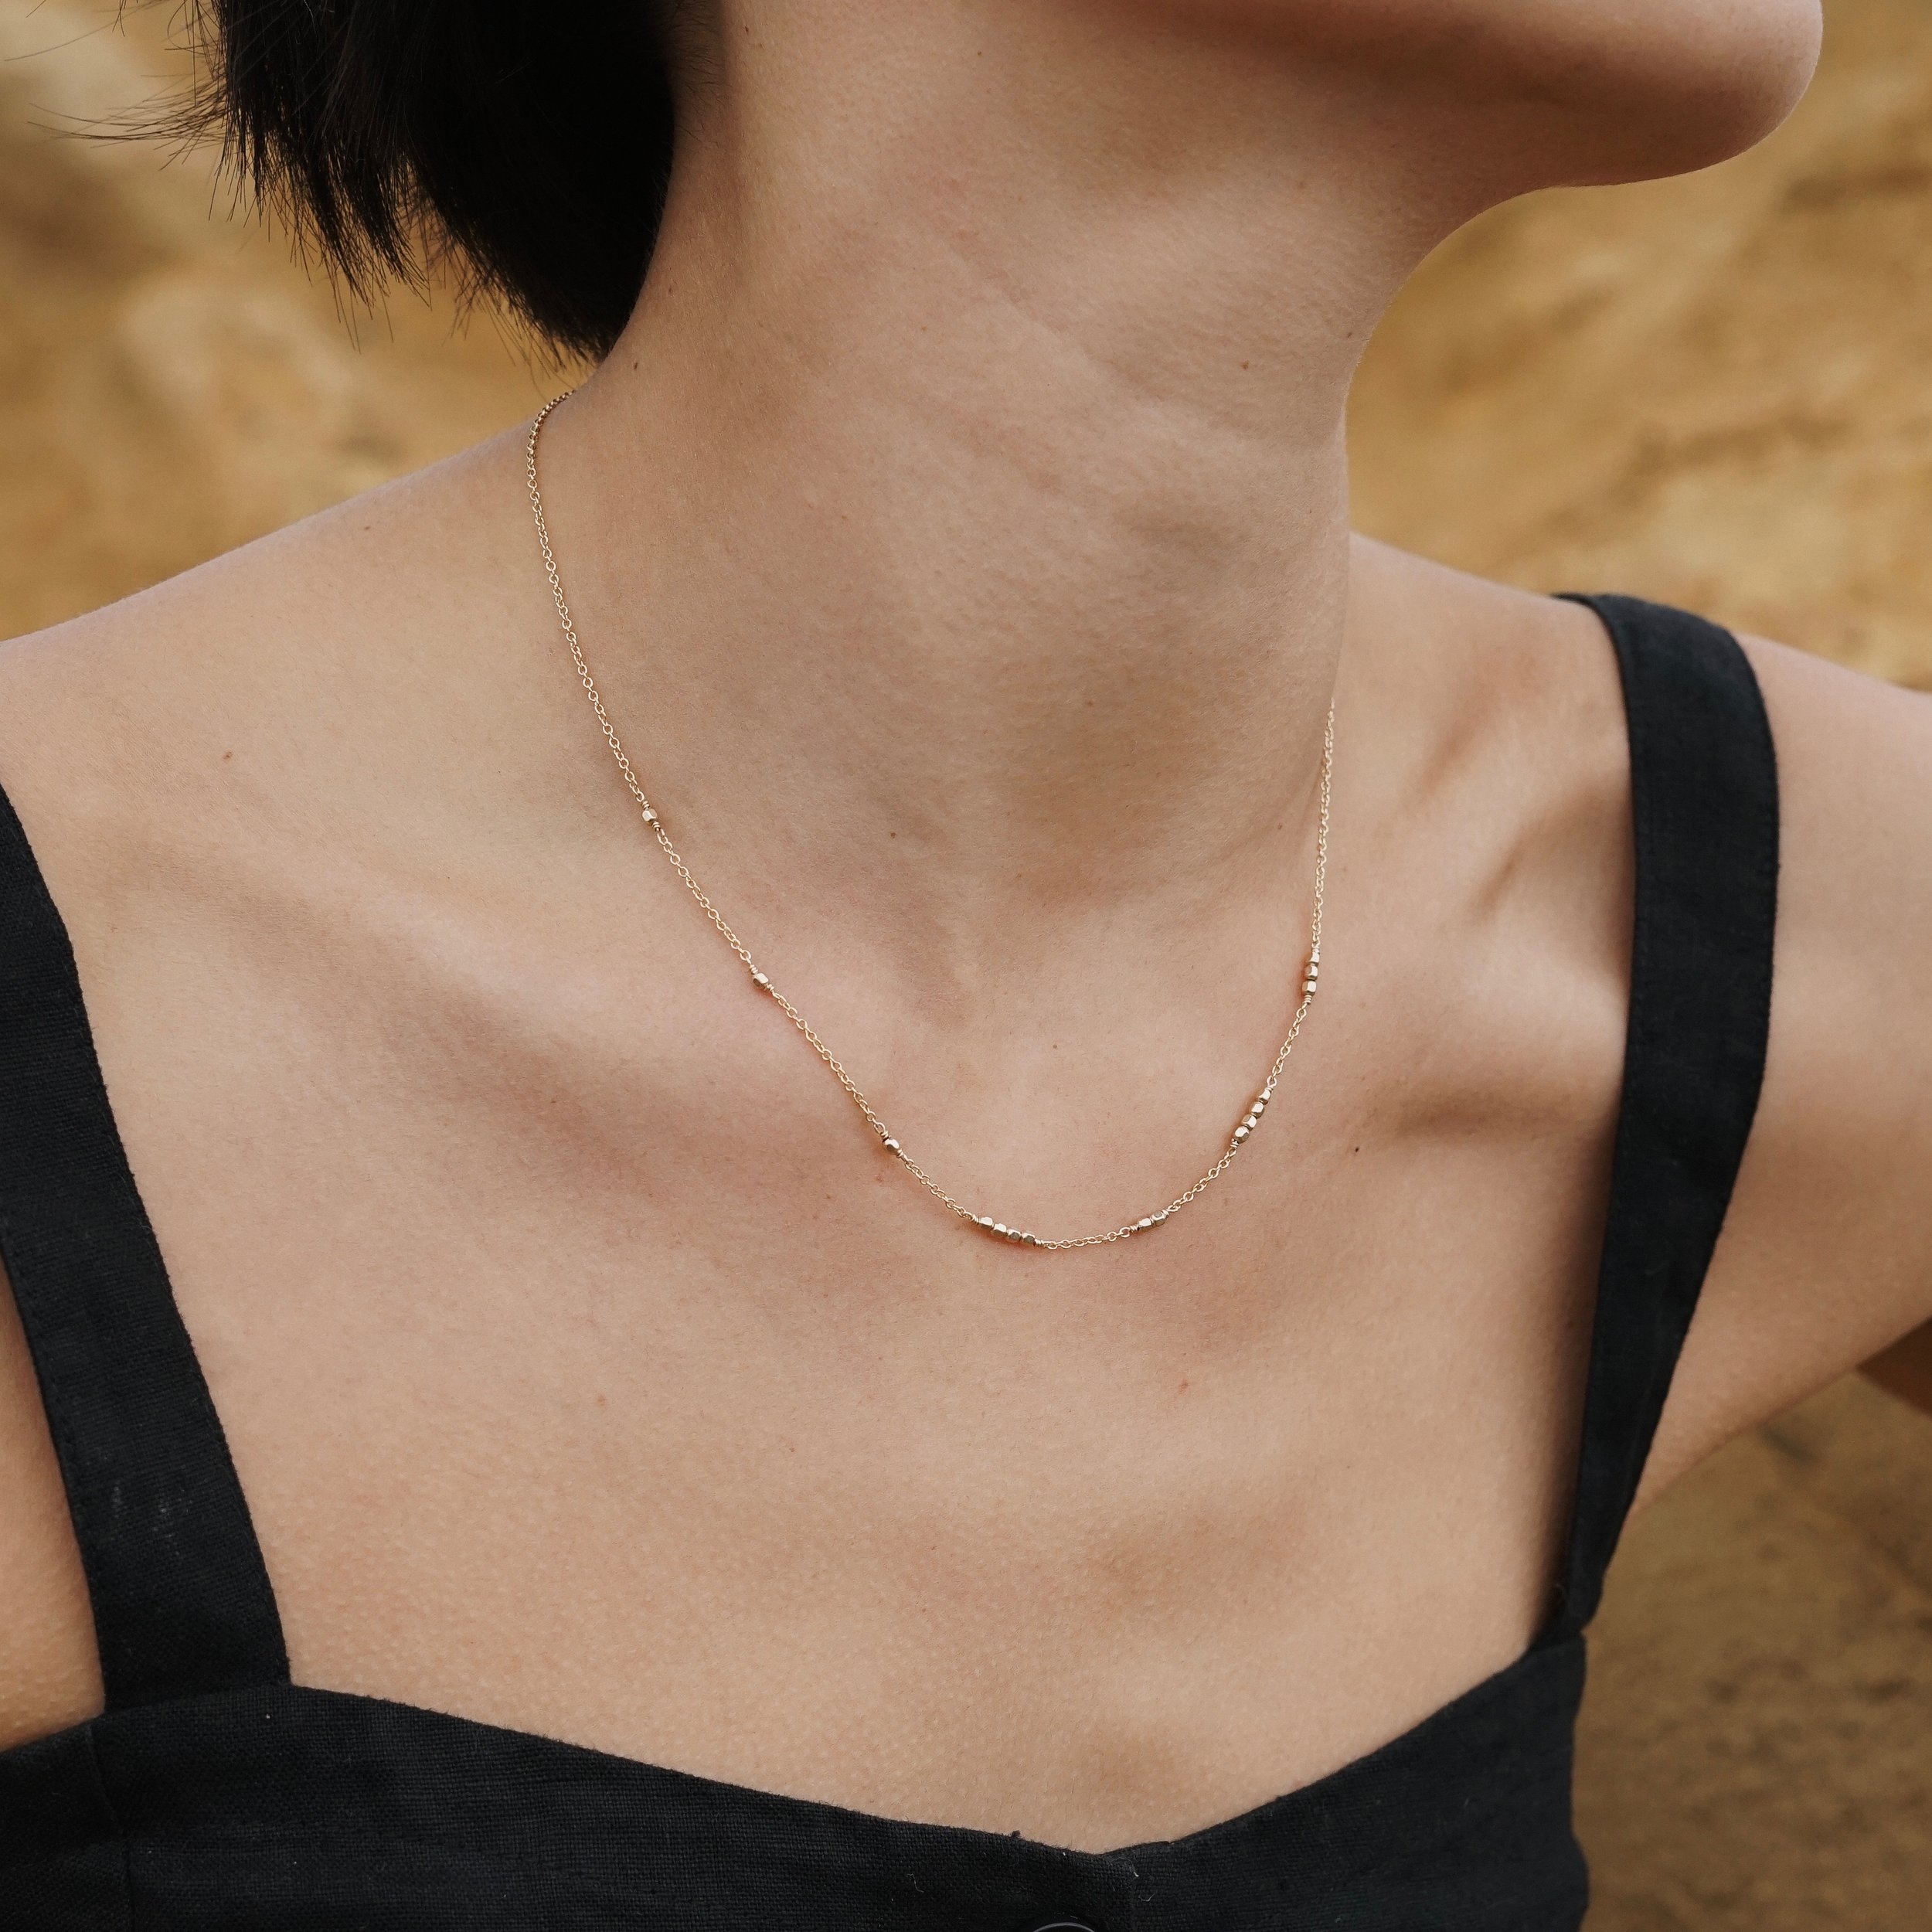 Morse Code Necklace: LOVE | Morse code necklace, Synthetic diamond,  Handcrafted fine jewelry